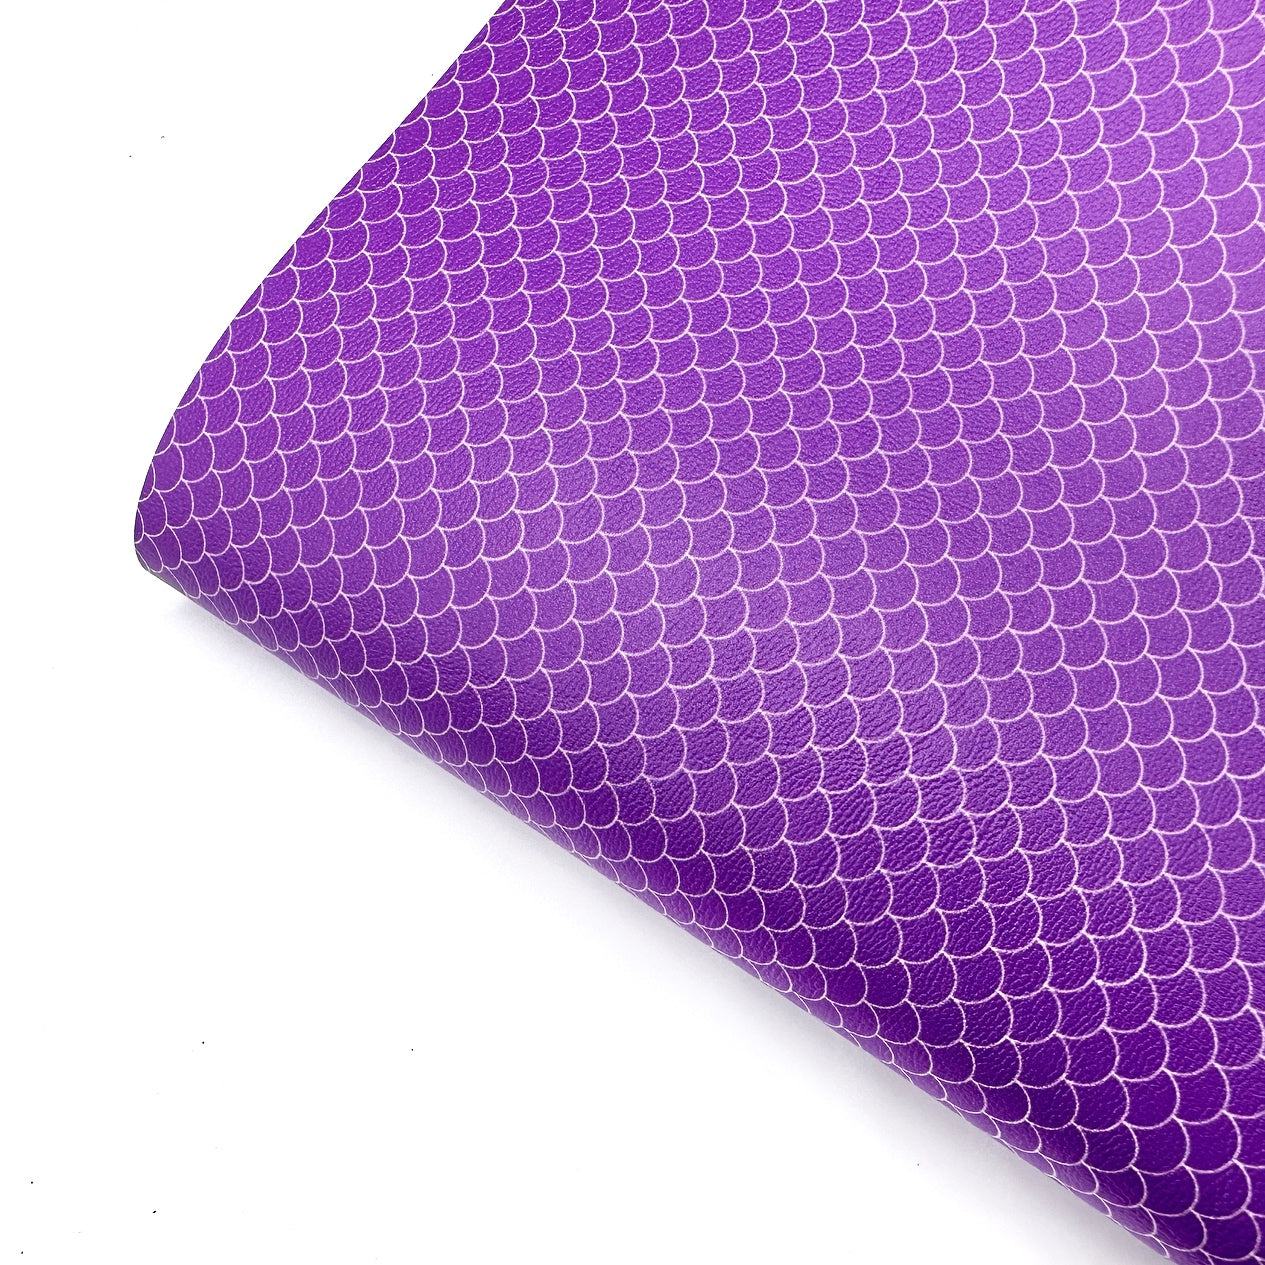 Purple Mermaid Scales Premium Faux Leather Fabric Sheets